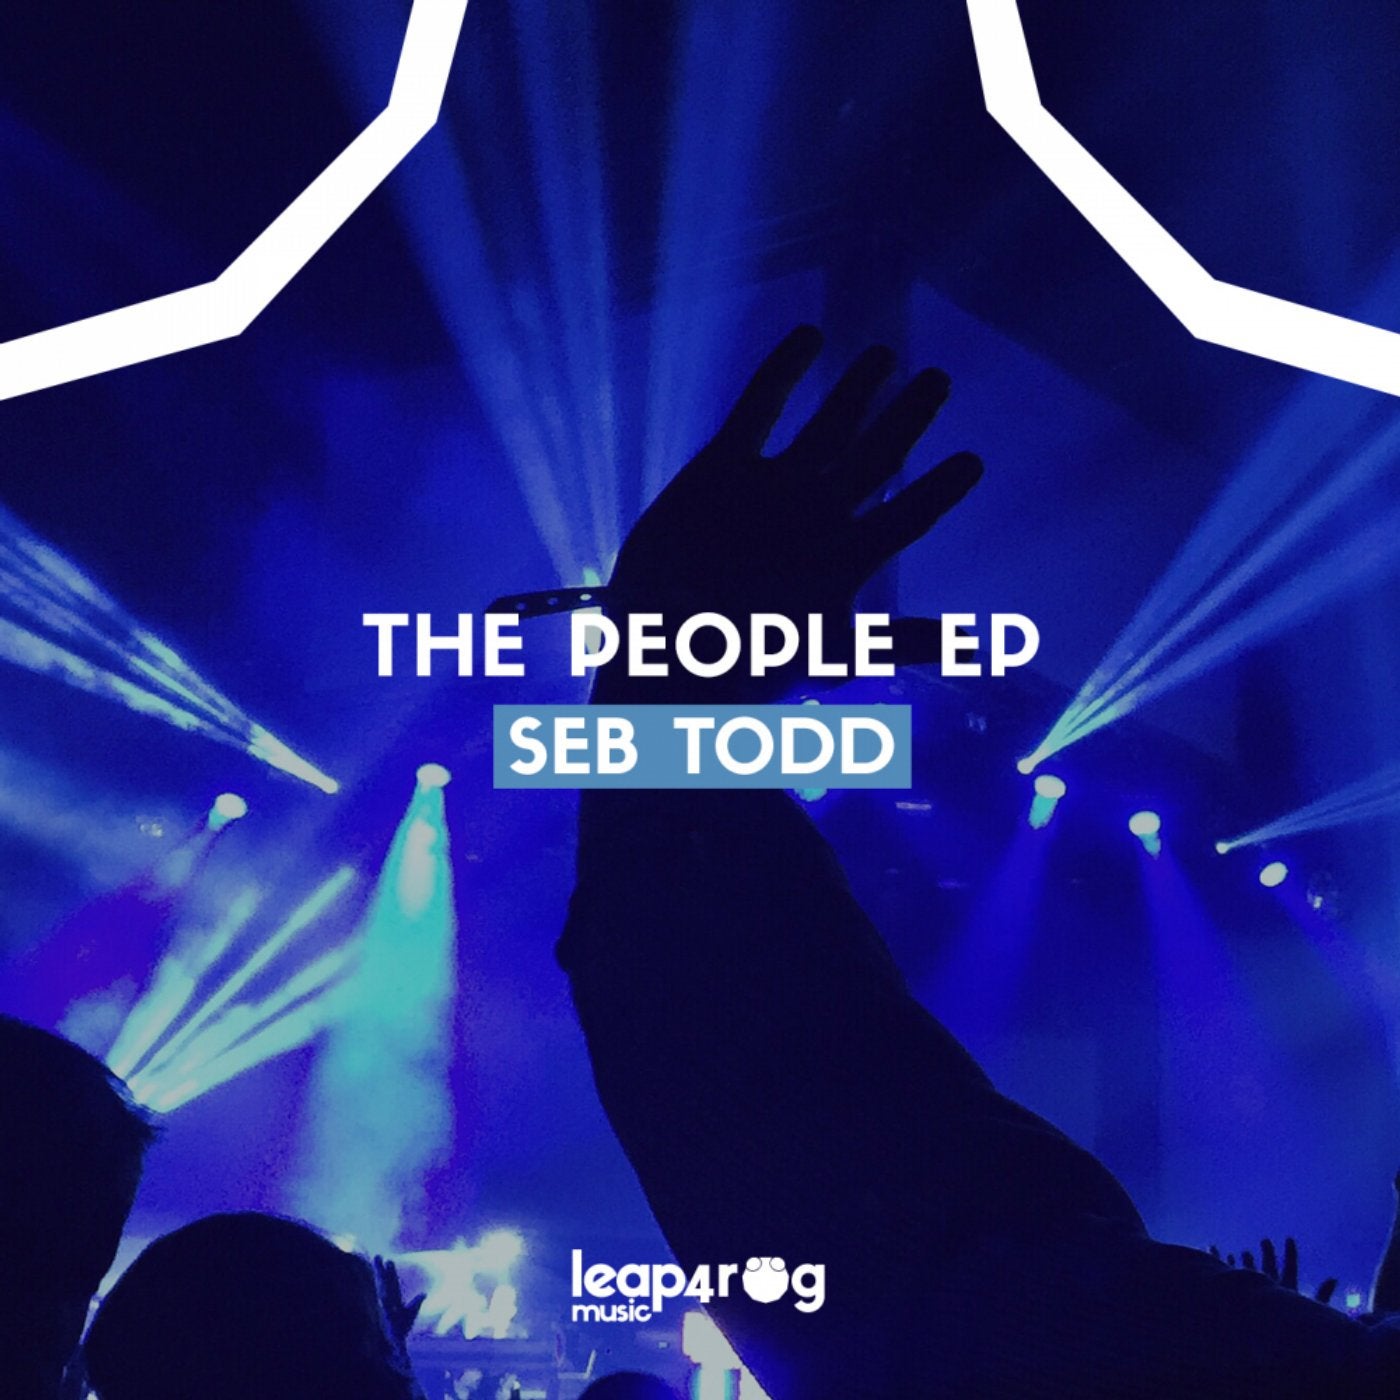 The People EP